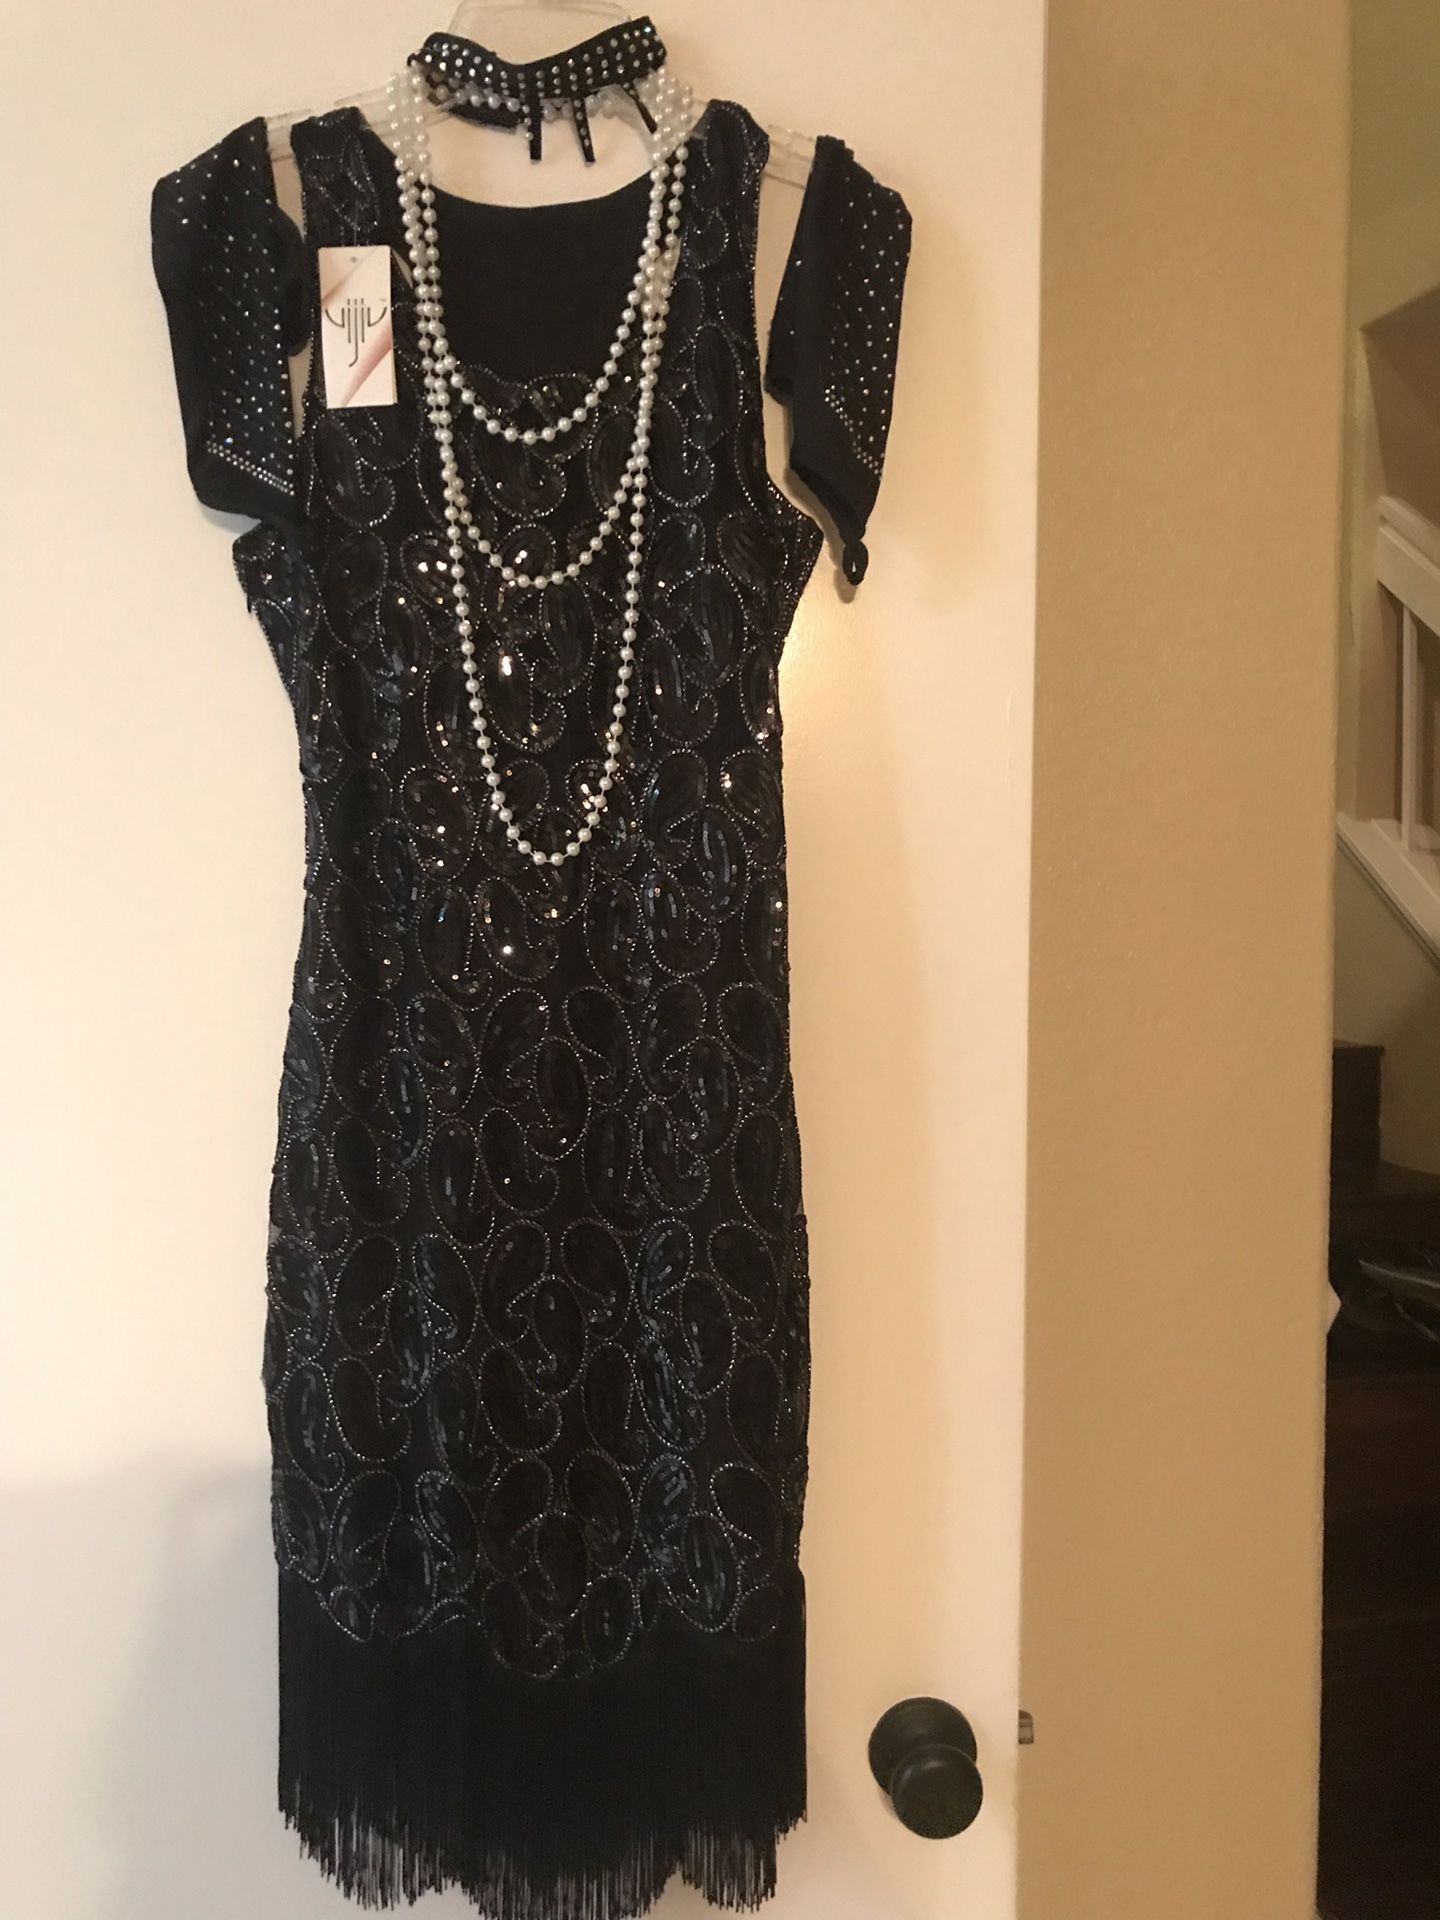 Halloween costume roaring 20s or Dress for roaring 20s party